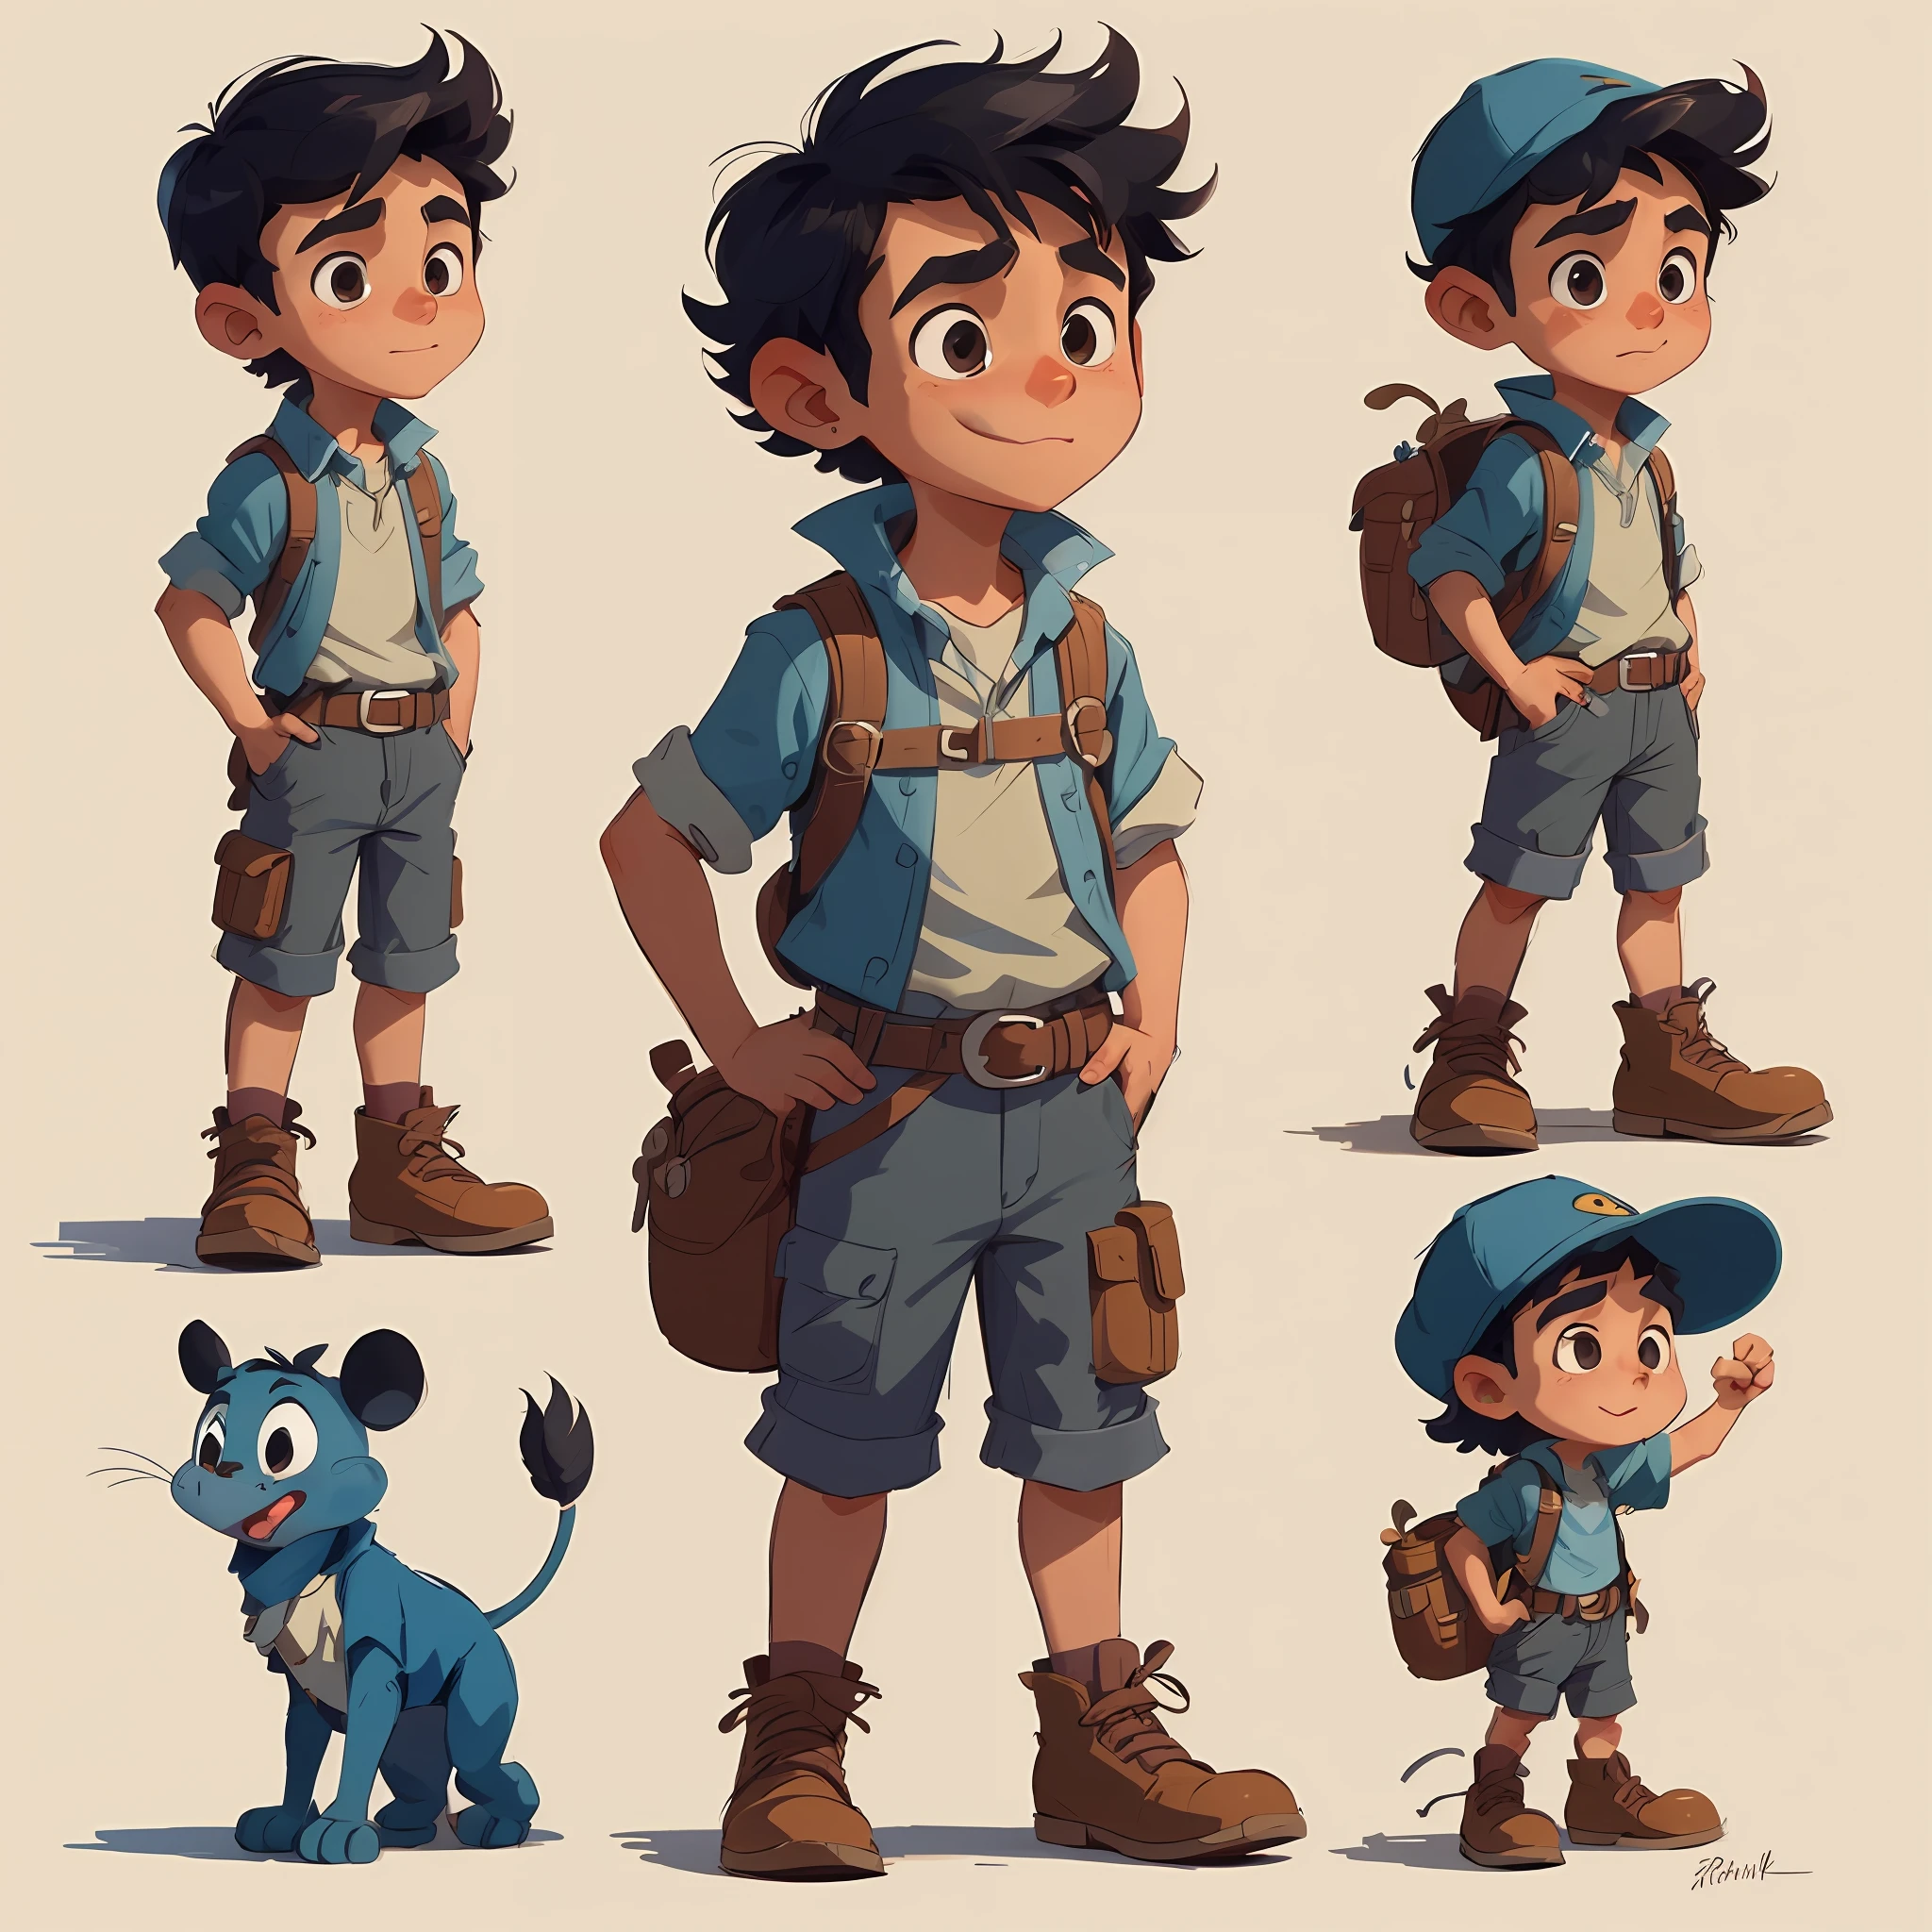 cartoon character of a boy with different poses and poses, cartoon concept art, very stylized character design, stylized character design, highly detailed character design, childrens art in artstation, character design, disney character style, concept art of single boy, animated character design, high quality character design, character exploration, great character design, in style of disney animation, character illustration